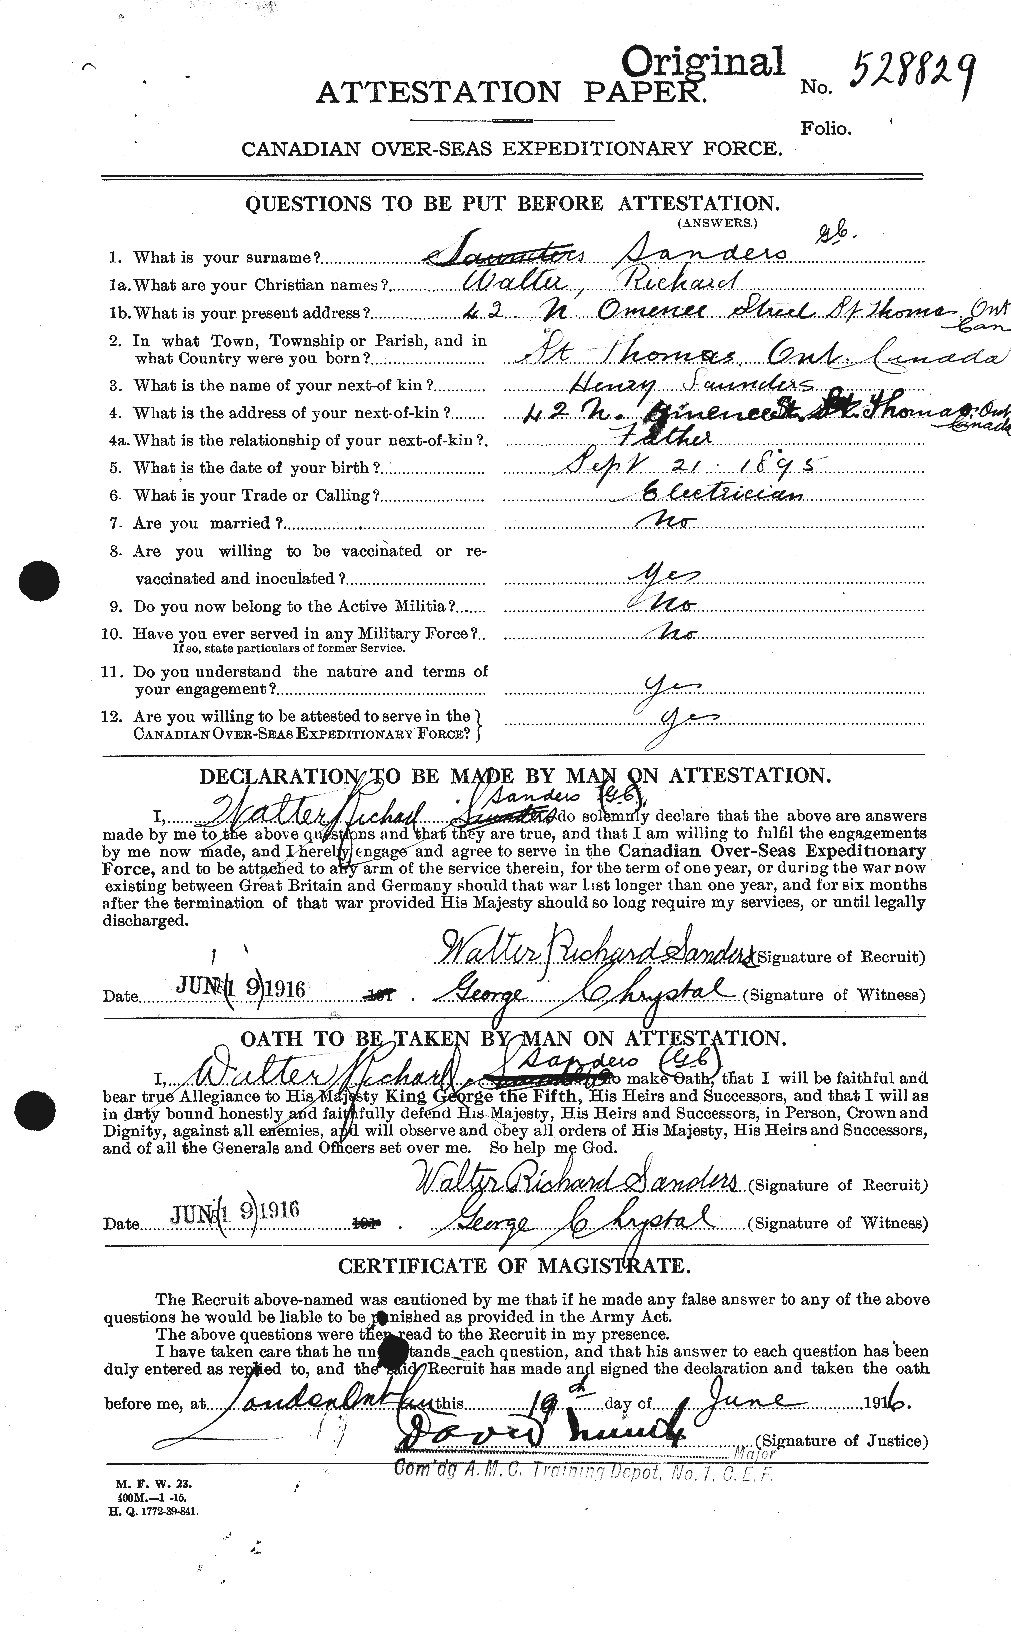 Personnel Records of the First World War - CEF 081343a